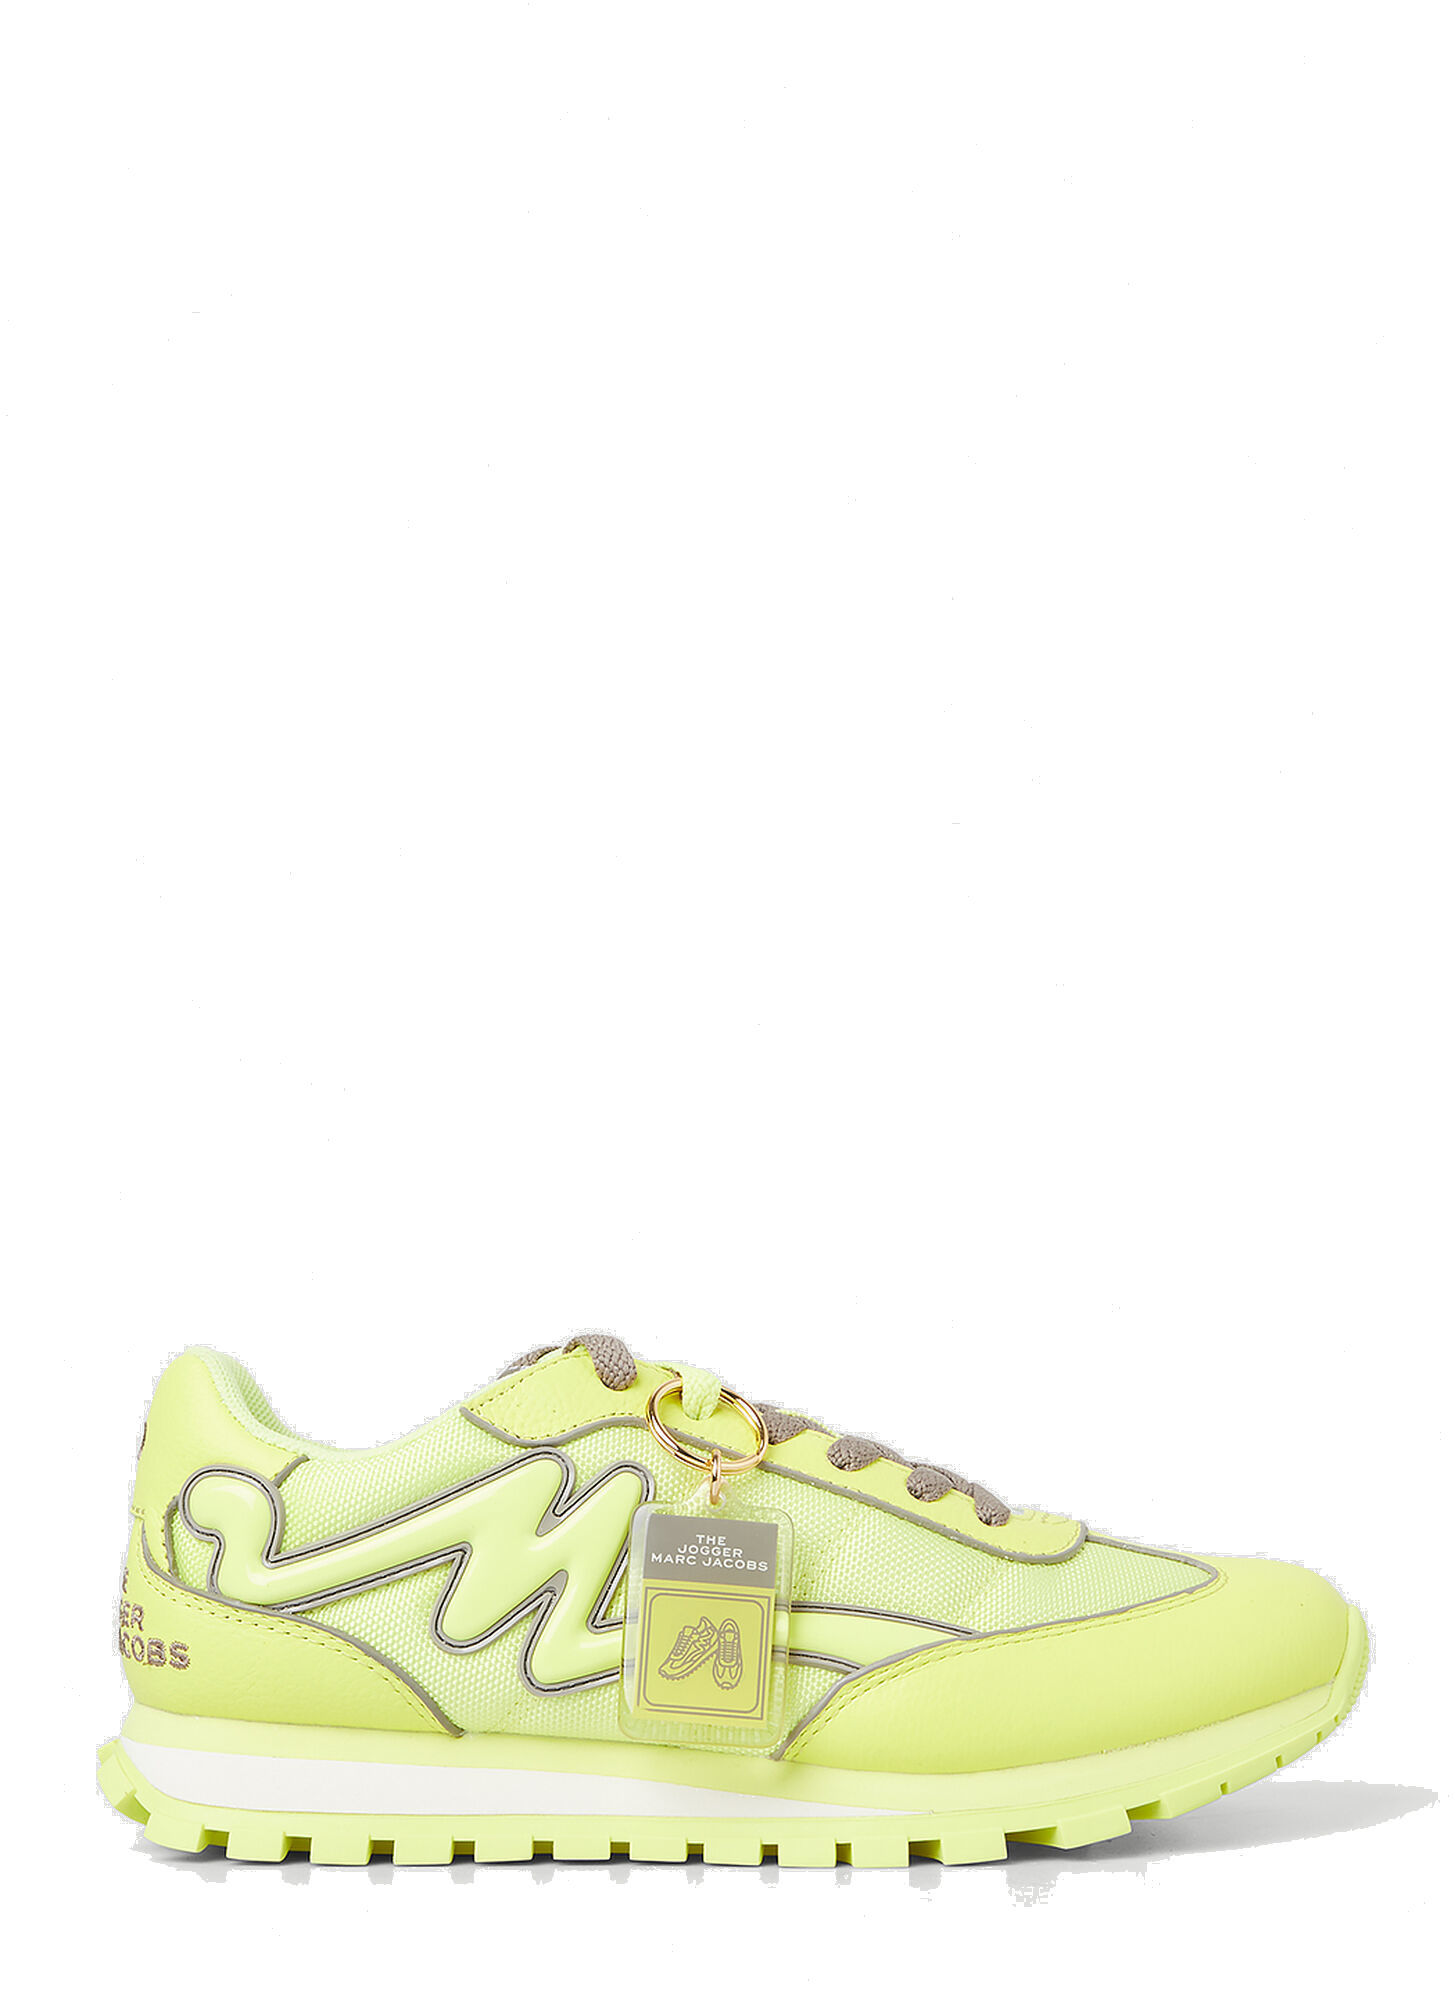 Photo: The Jogger Sneakers in Yellow